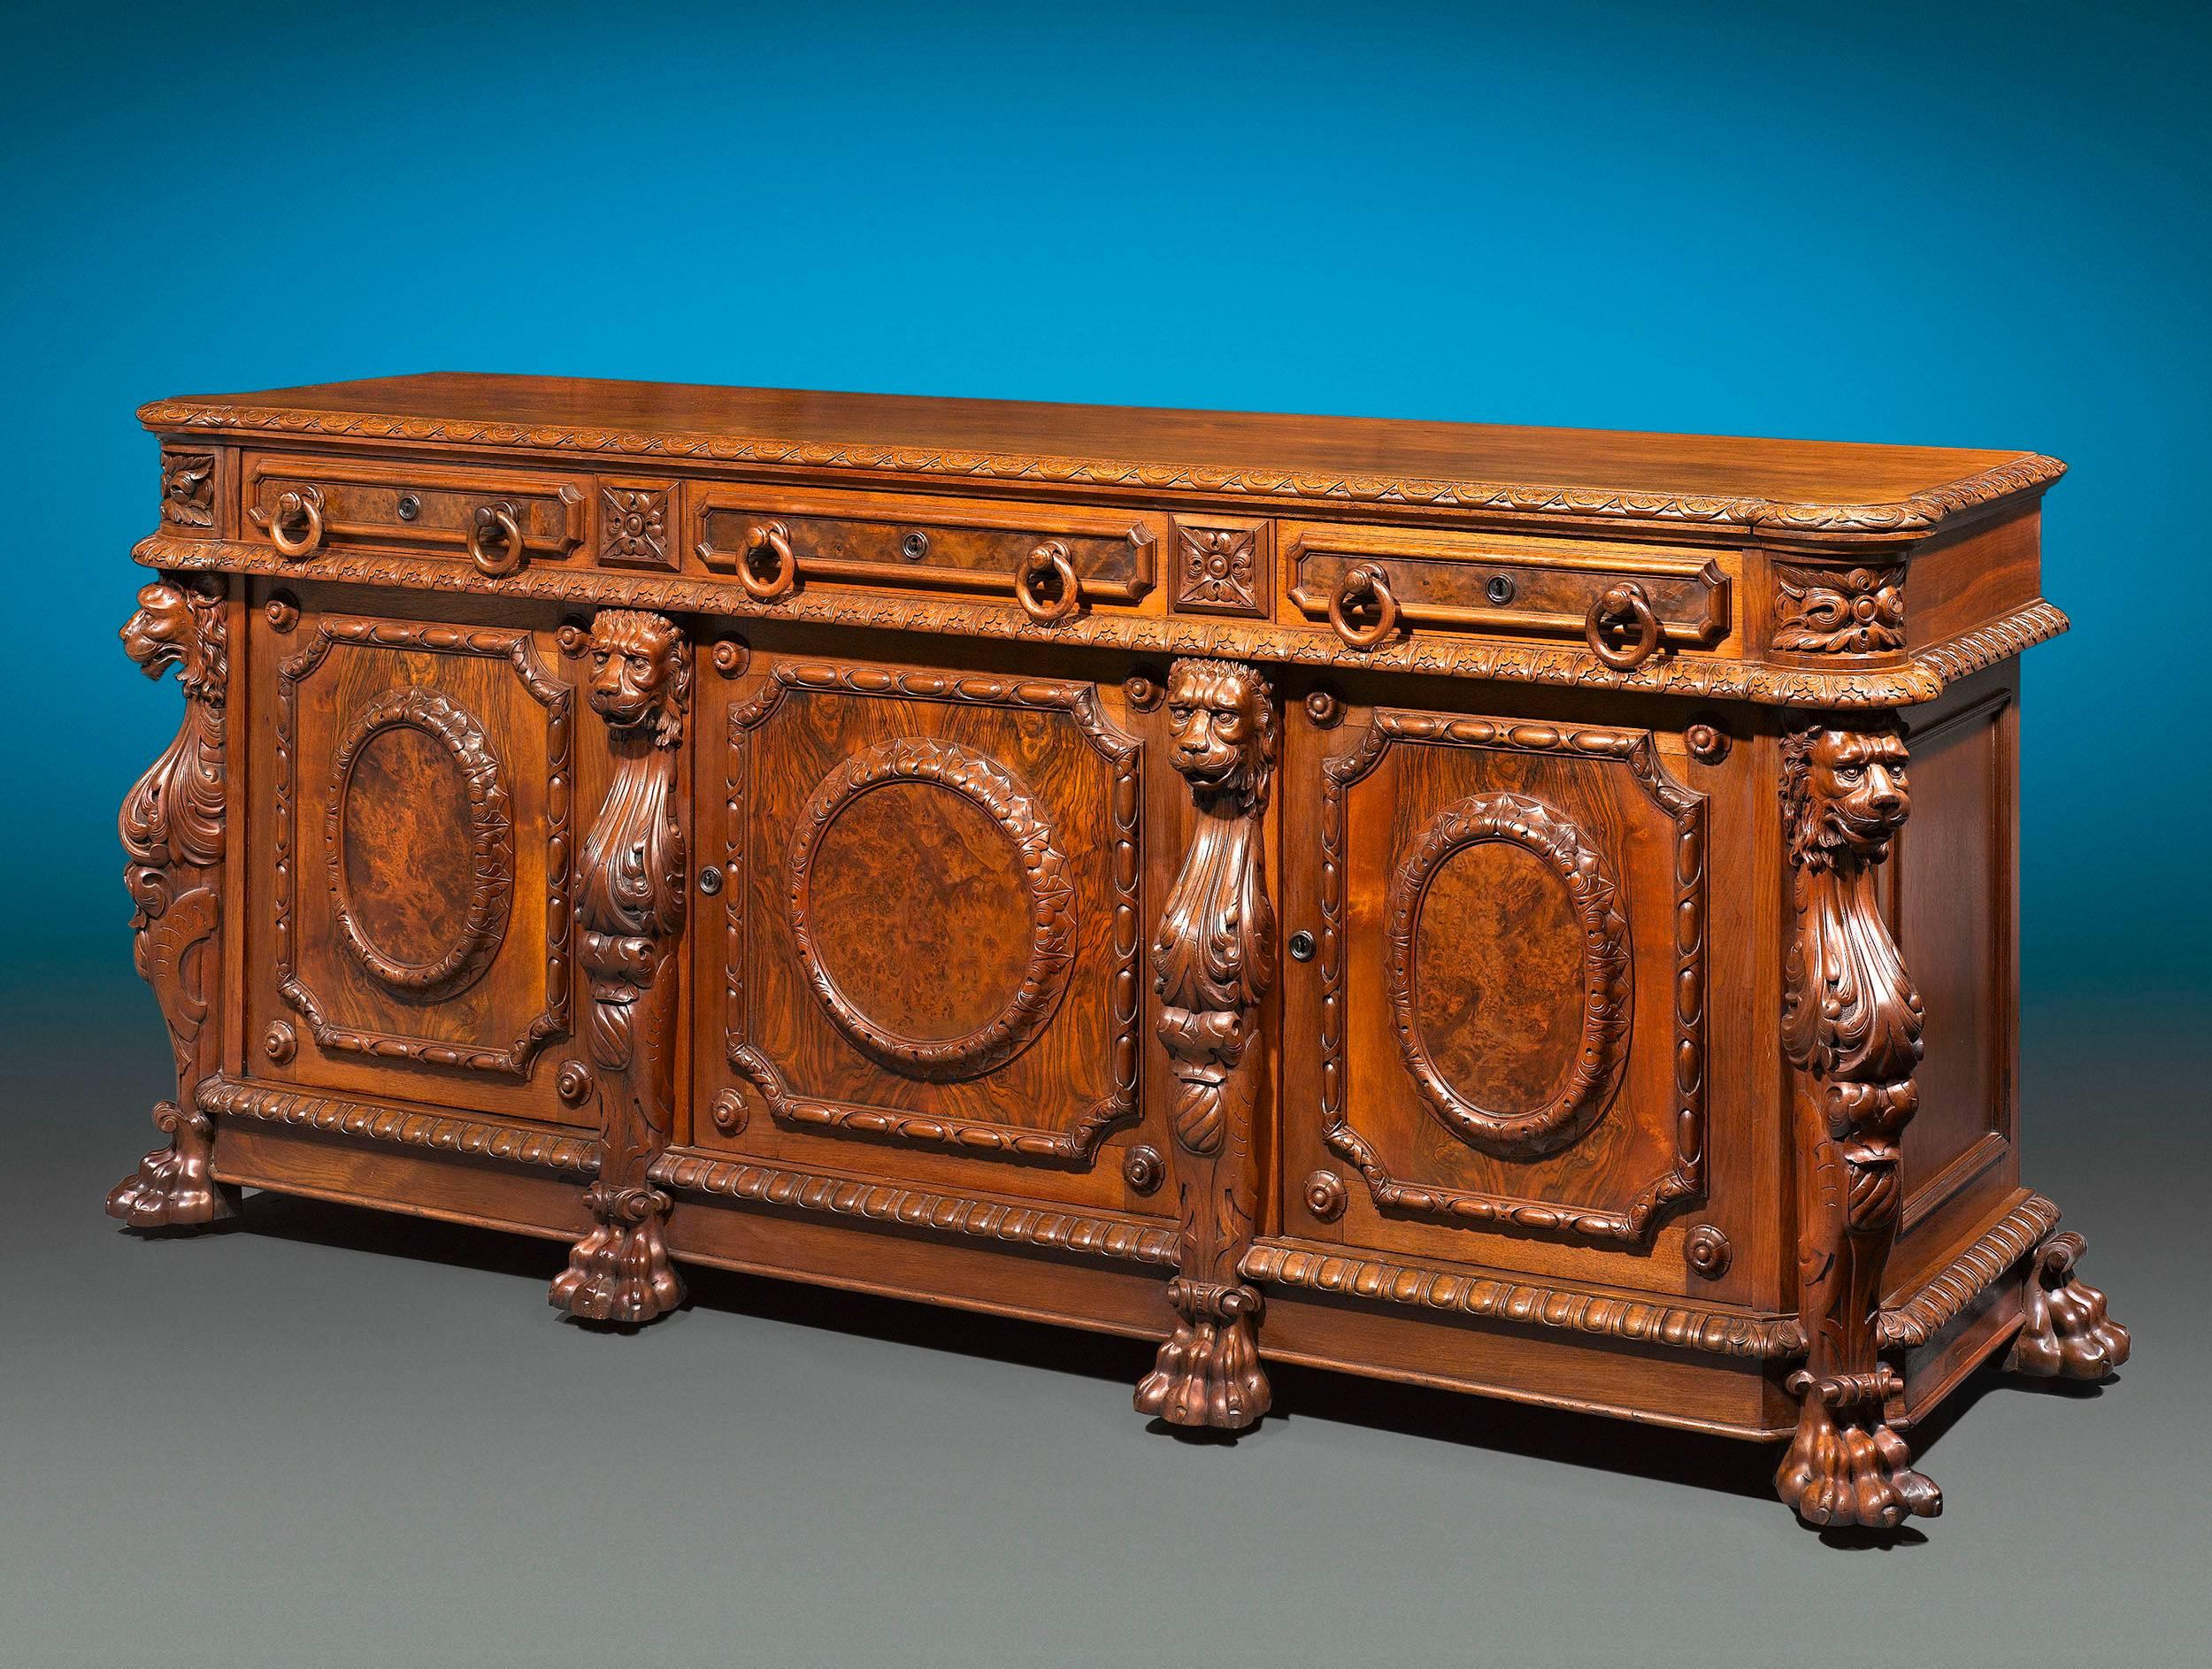 Sumptuous carvings distinguish this fine 19th century American walnut sideboard. Crafted in the Renaissance style, this grand furnishing boasts four beautifully hand-carved lion masks terminating in paw feet, gadrooned detailing and circular patera